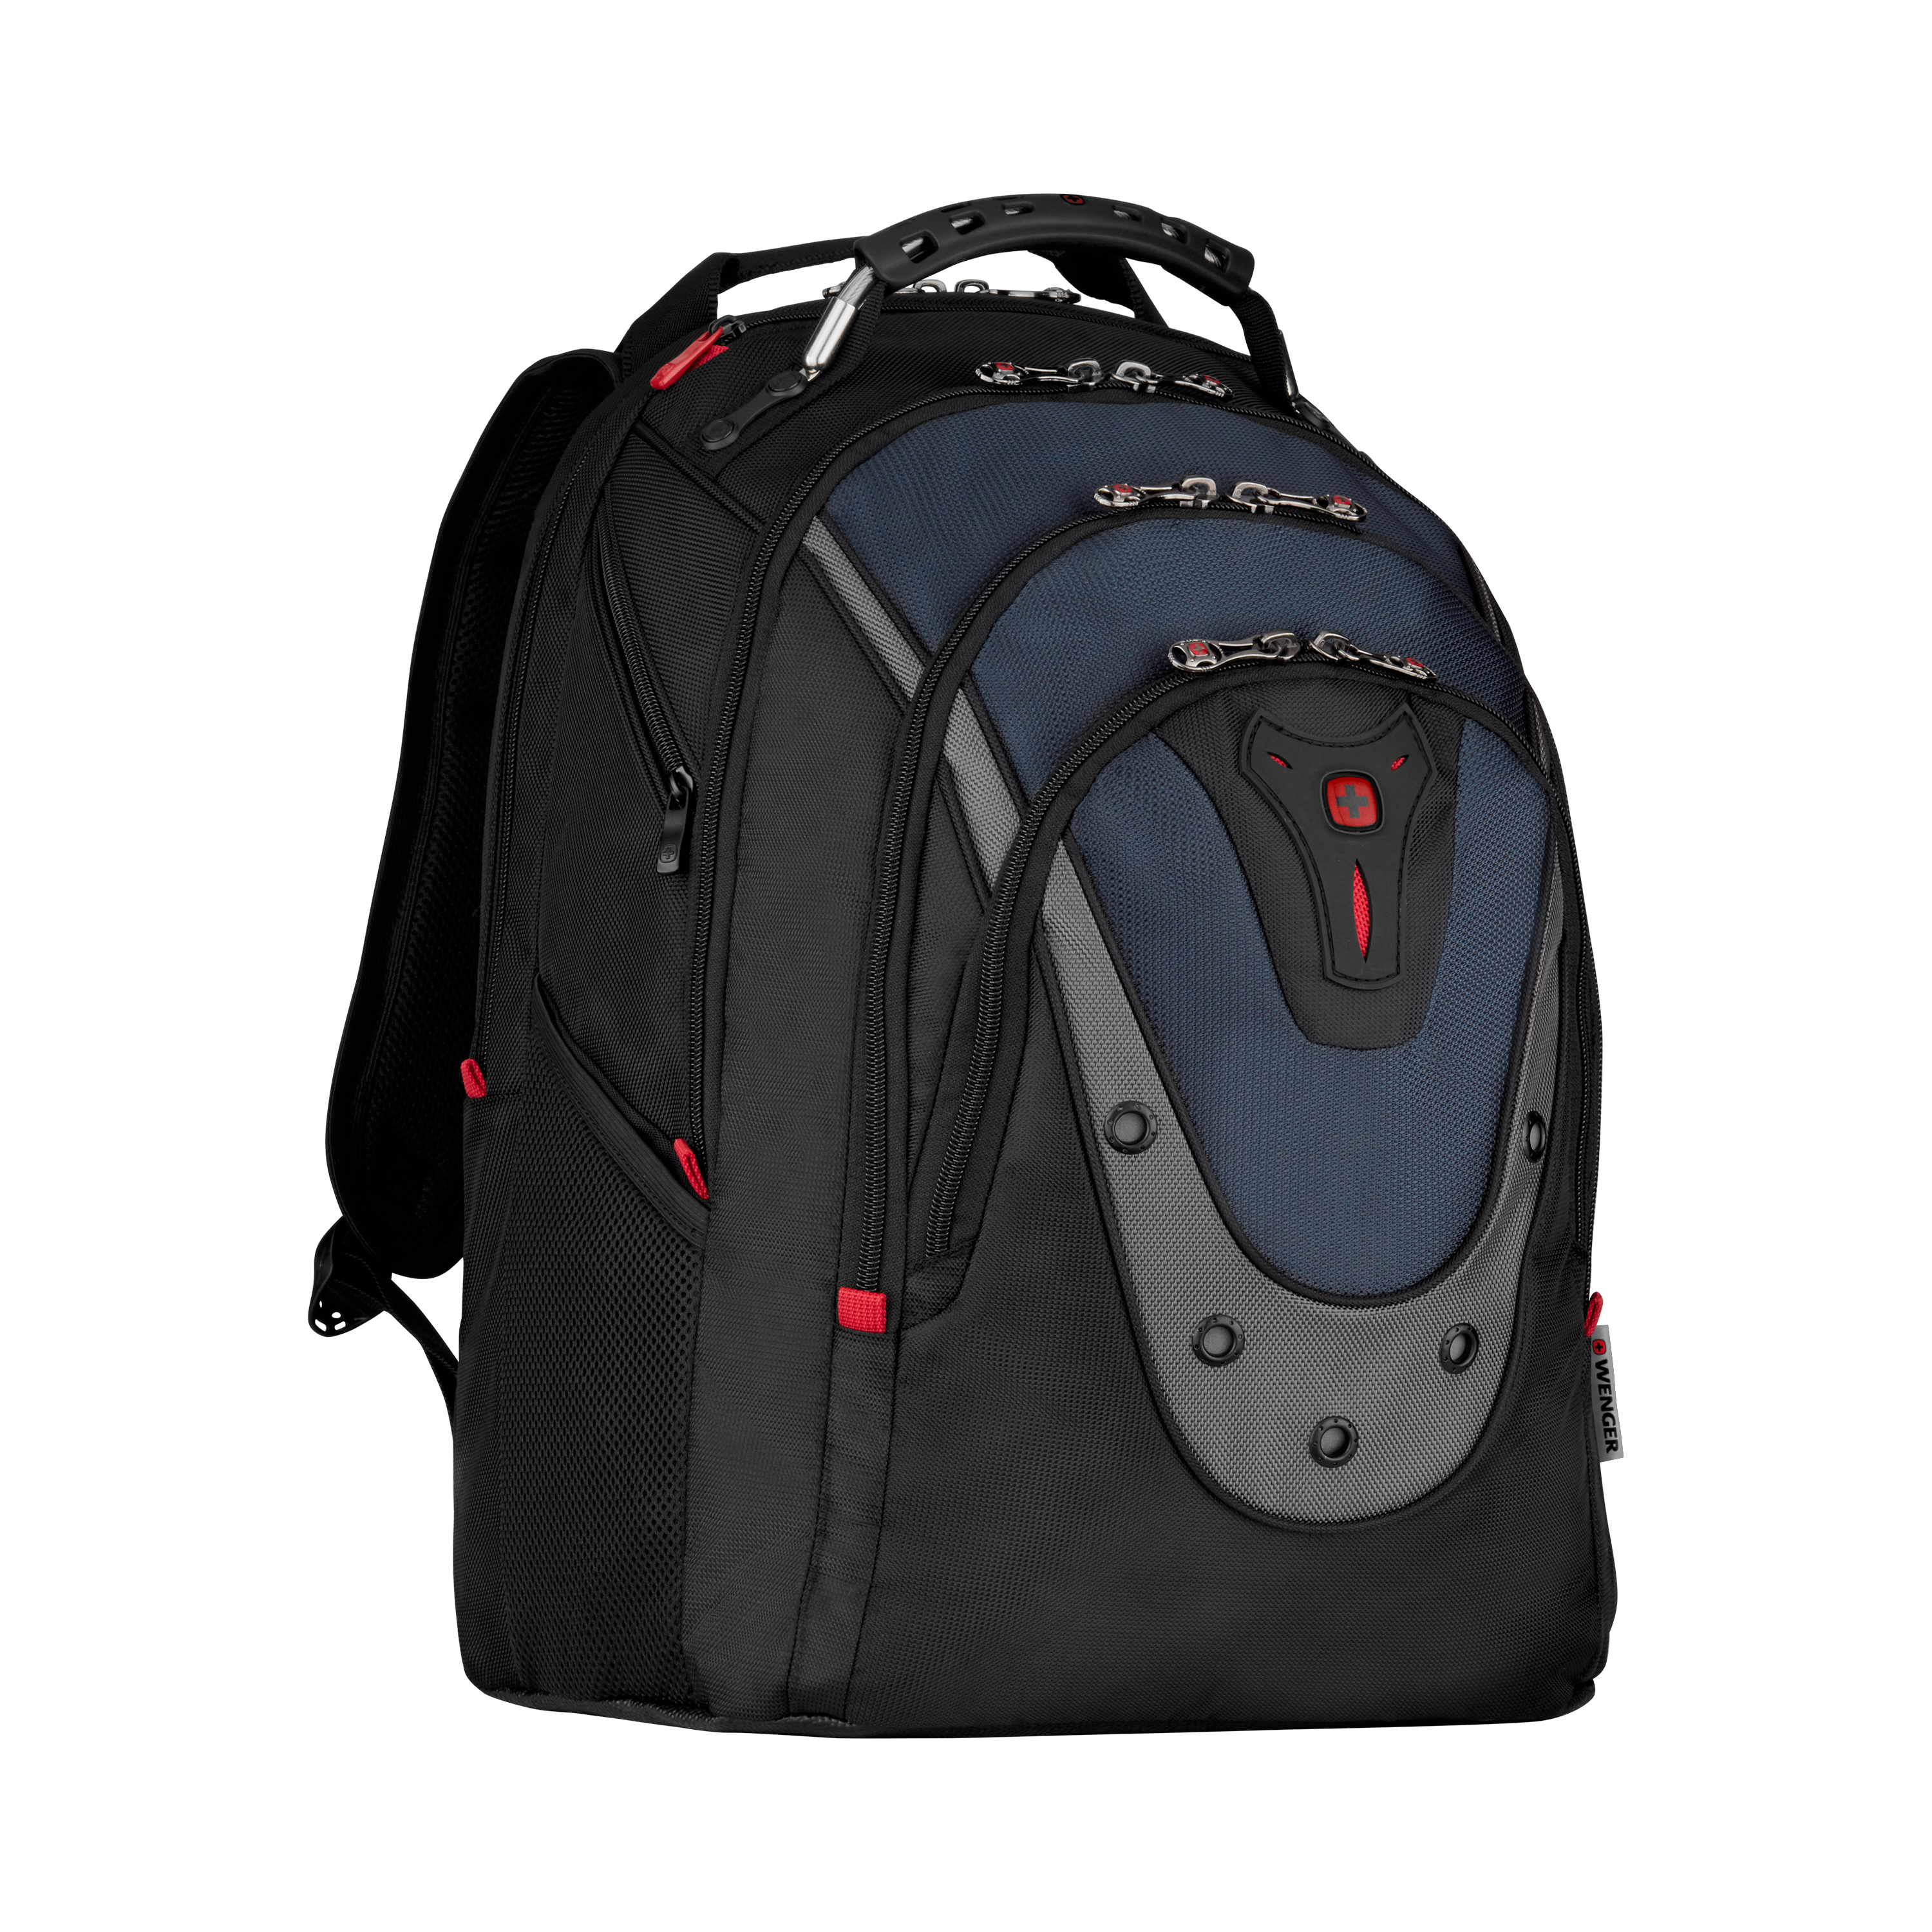 WENGER Notebook Backpack Ibex 600638 17.3 pouces 17.3 pouces